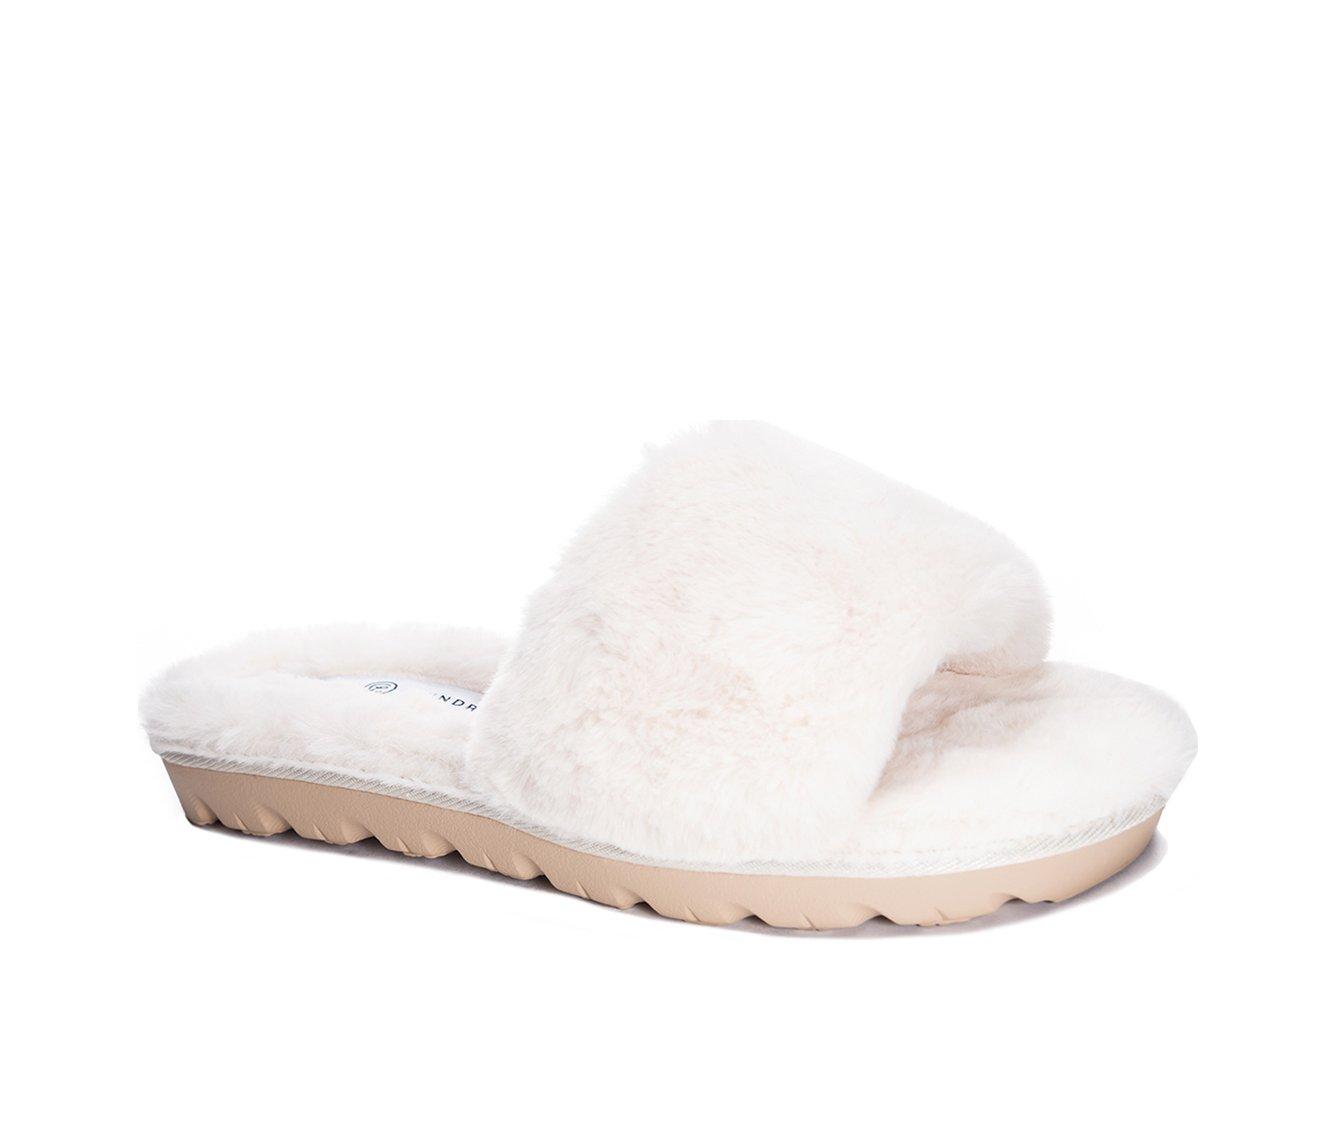 Chinese Laundry Rally Slide Slippers